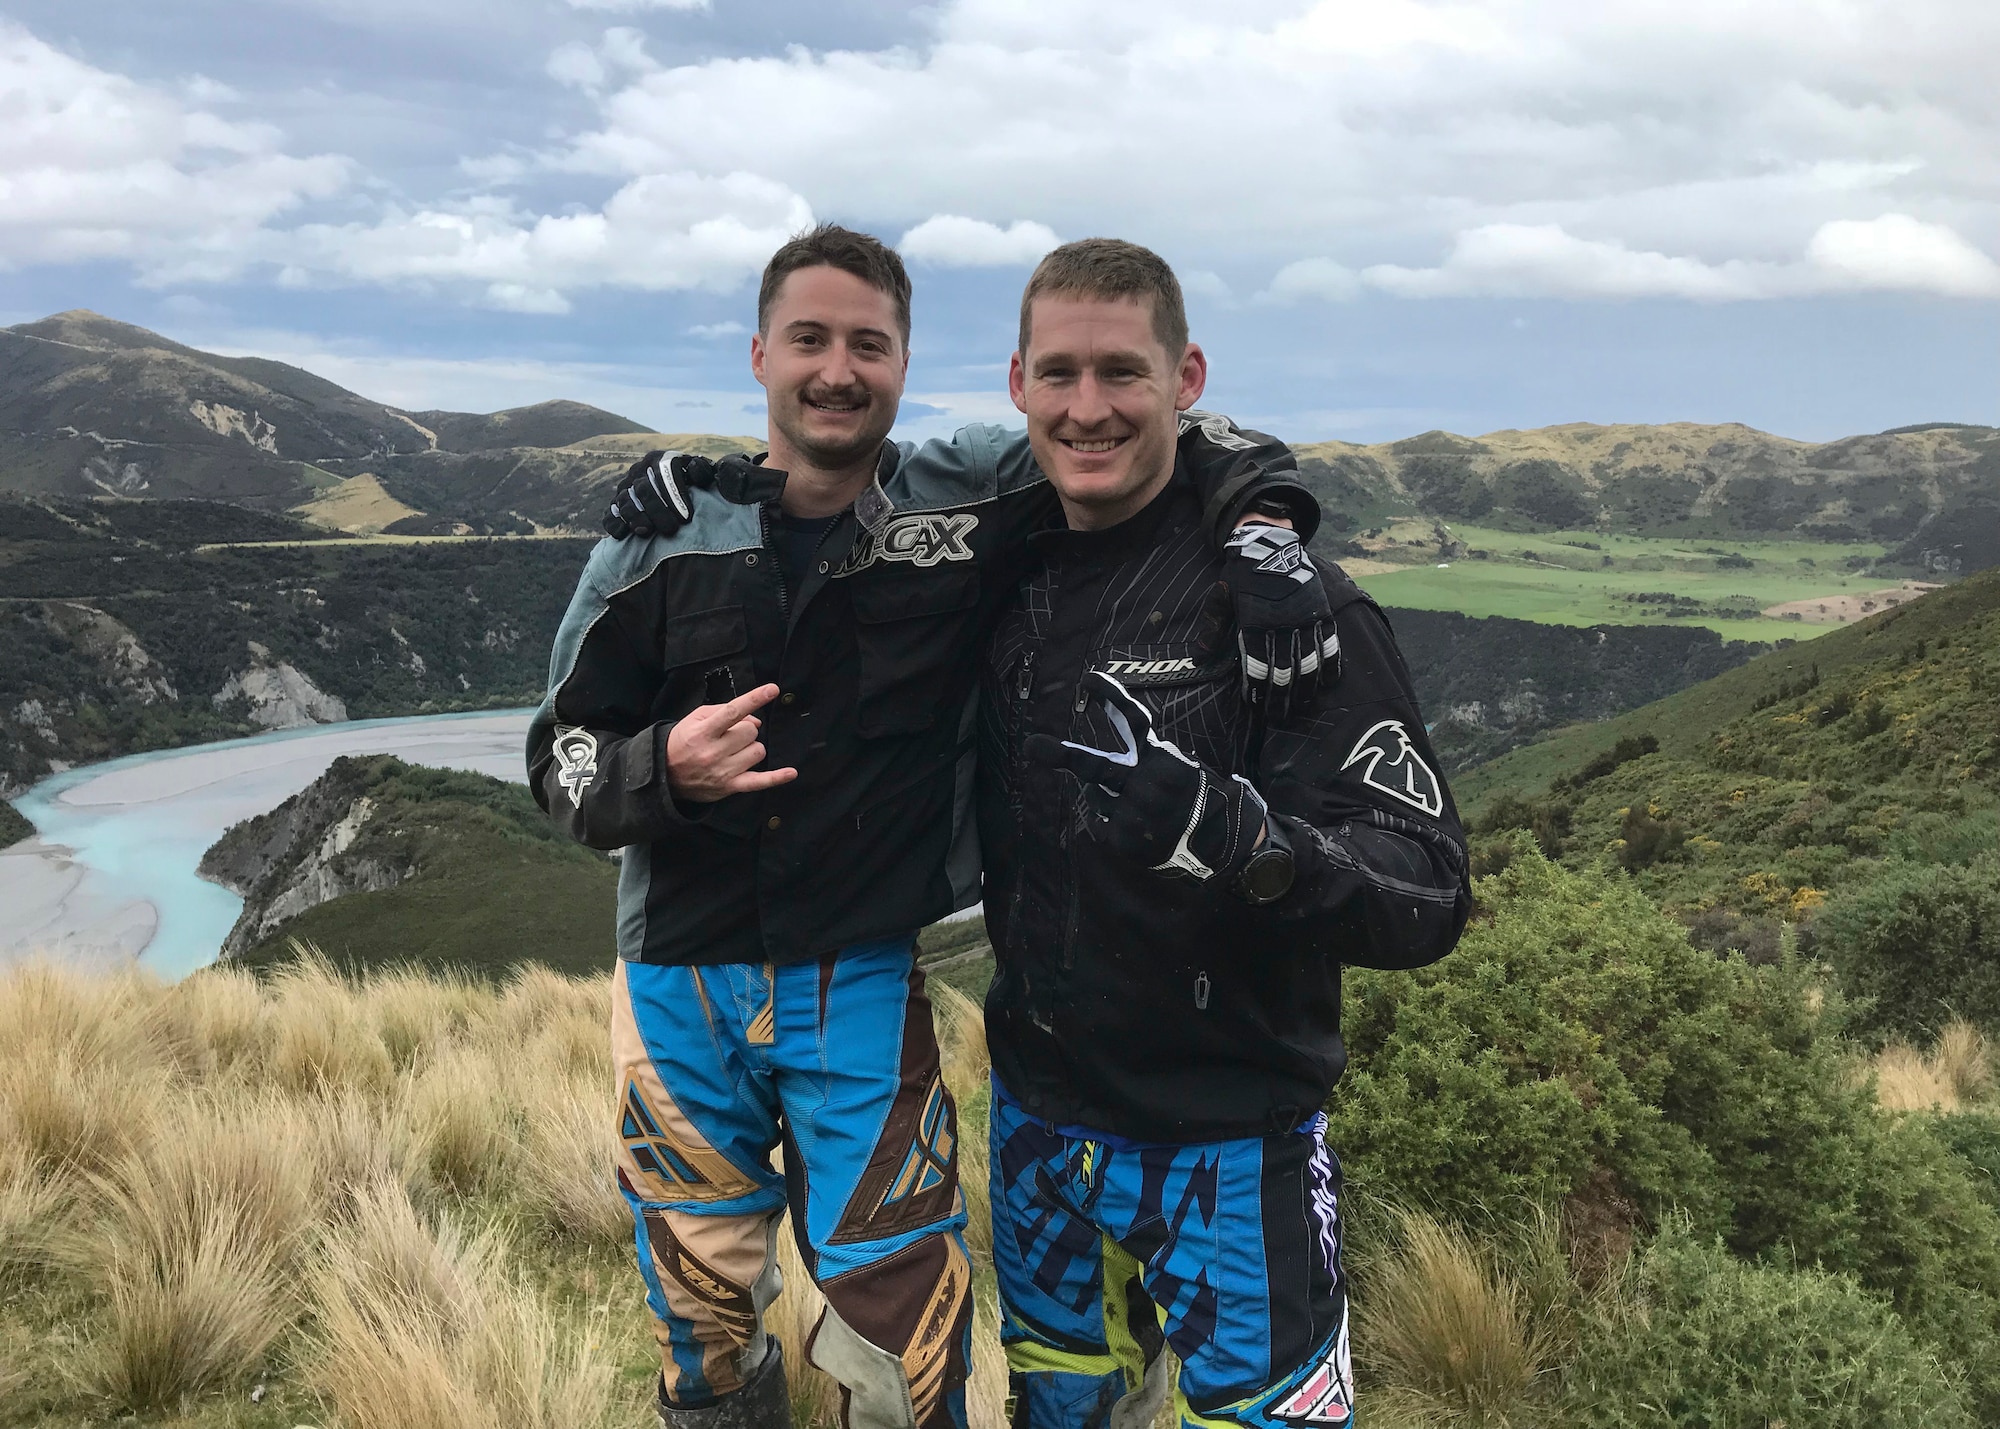 U.S. Air Force Capt. Jacob “Primo” Impellizzeri, left, the Pacific Air Forces F-16 Fighting Falcon Demonstration Team commander and pilot, and Maj. Richard “Punch” Smeeding, right, a 13th Fighter Squadron F-16 pilot, pause for a photo on a mountain in Christchurch, New Zealand, March 27, 2019. In Impellizzeri’s free time, he enjoys hiking, skiing, hunting, boating, fishing and snowboarding. (Courtesy photo)